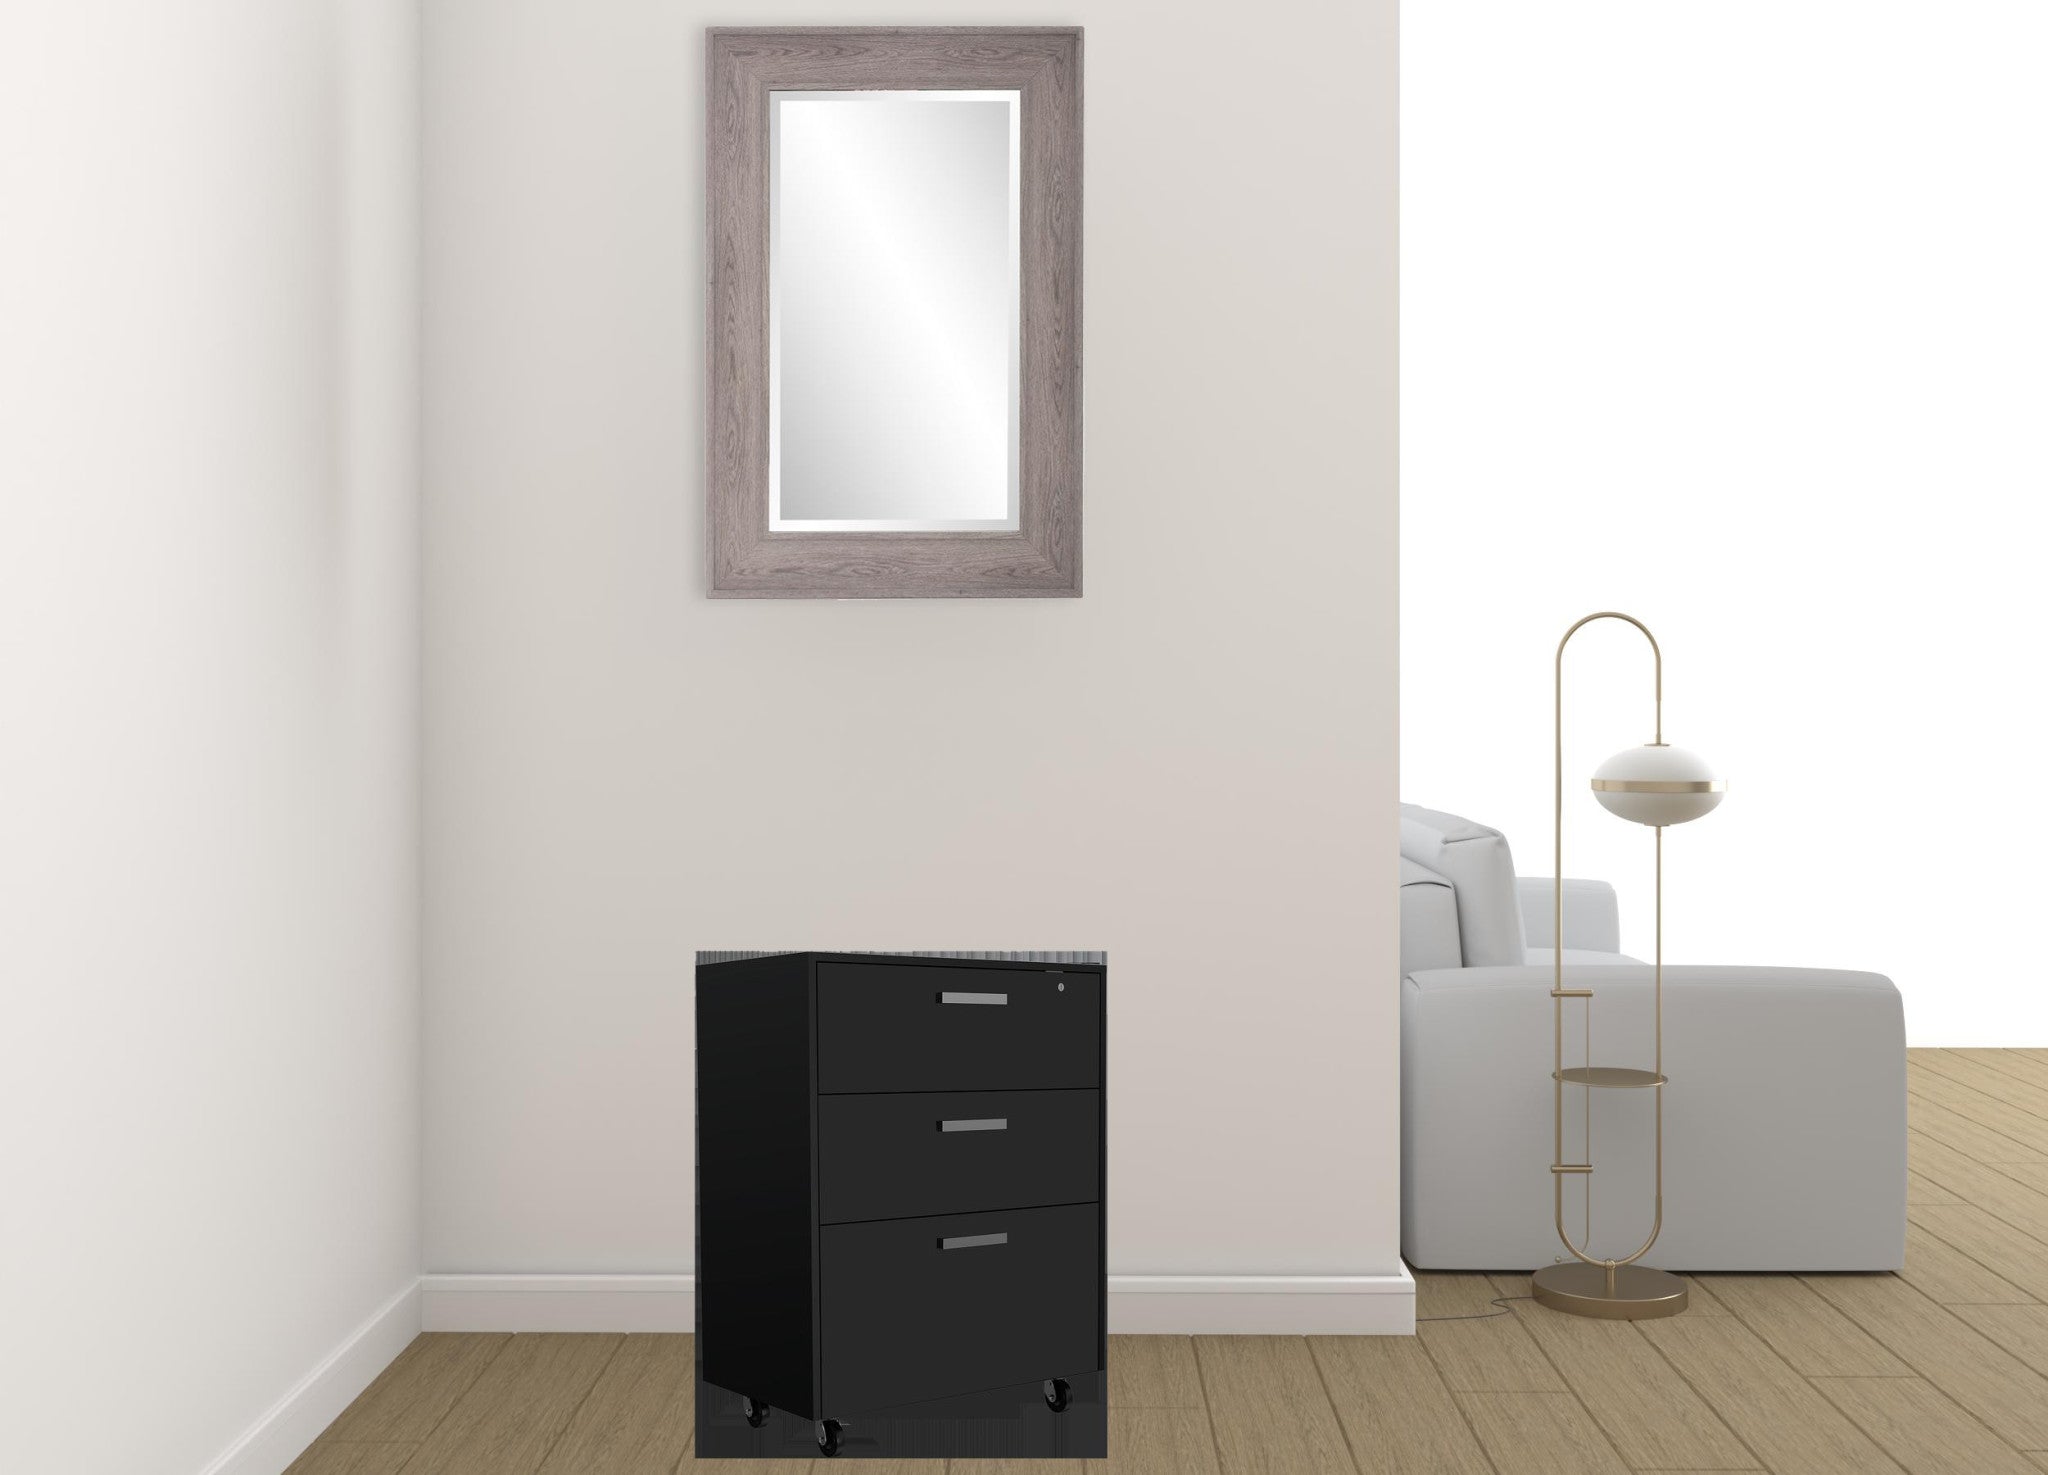 28" Black Wall mounted Accent Cabinet With Twelve Shelves And Six Drawers